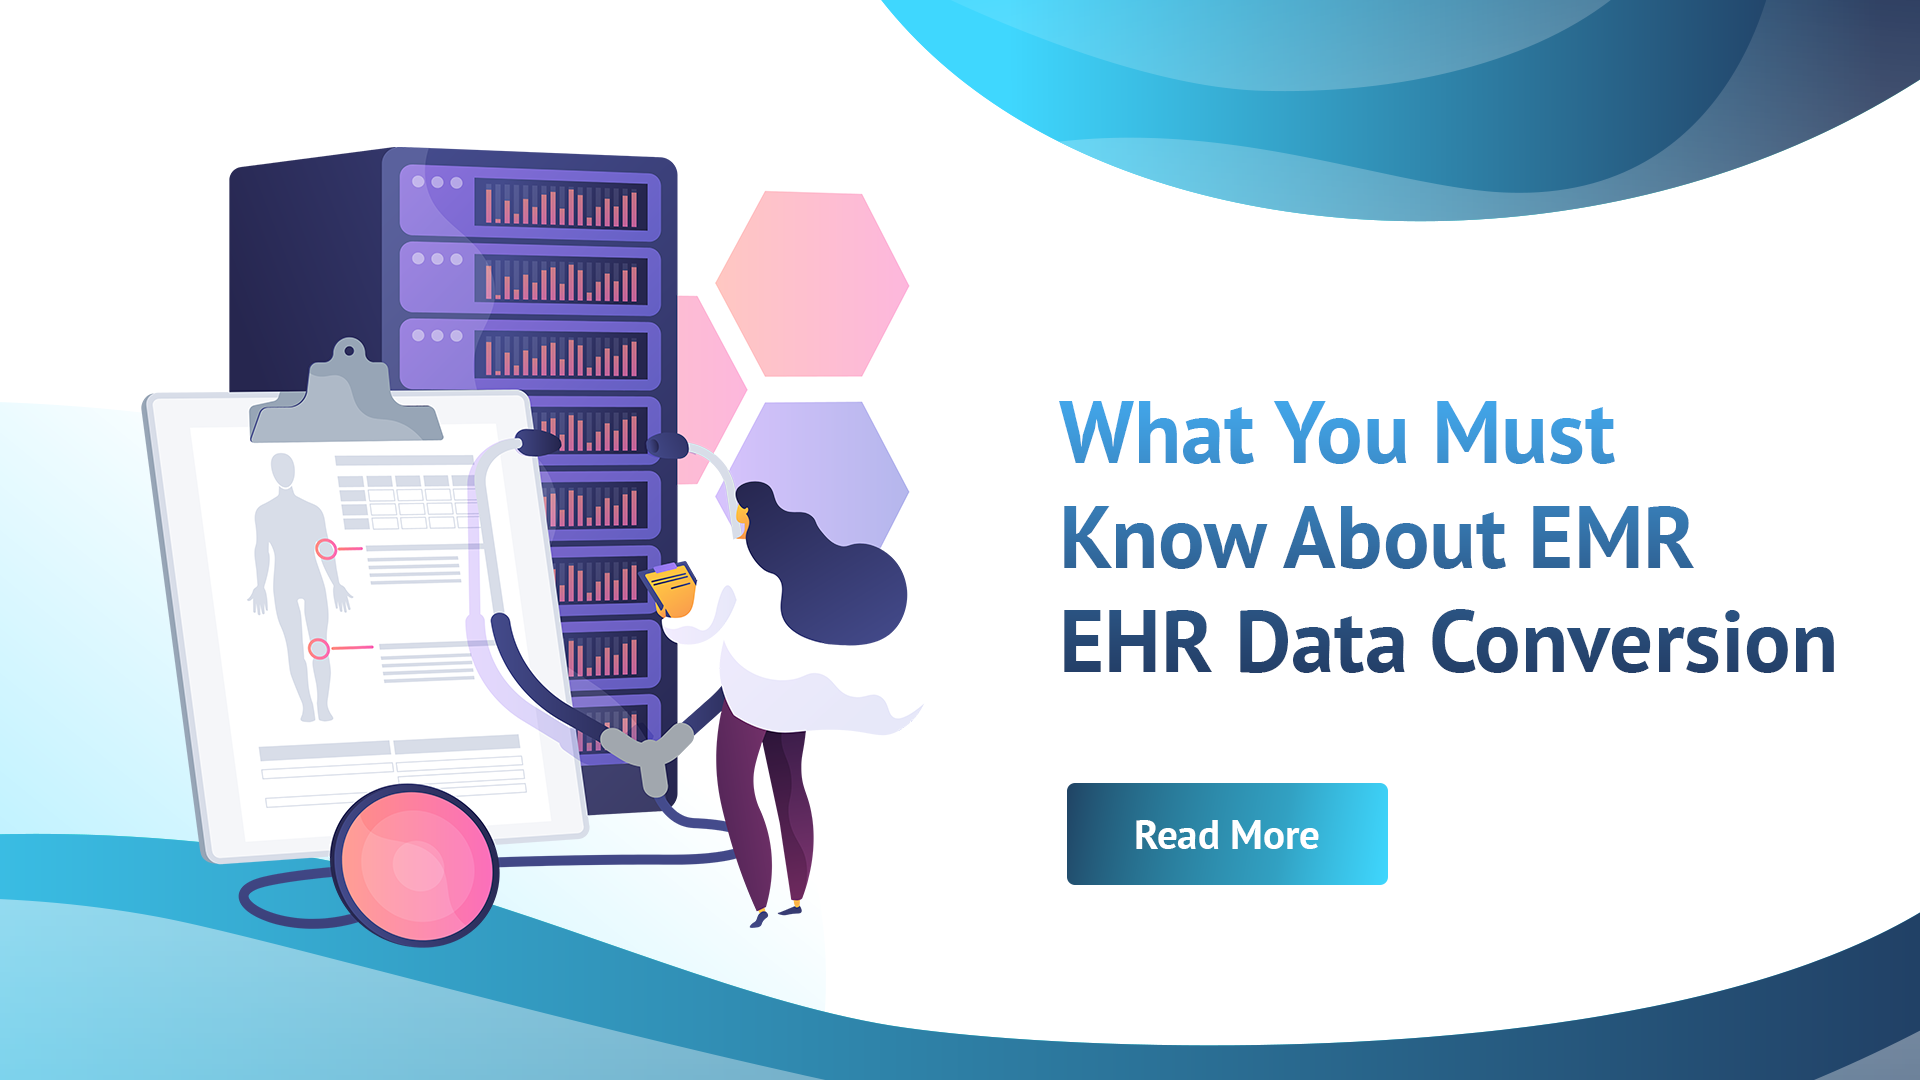 What You Must Know About EMR EHR Data Conversion